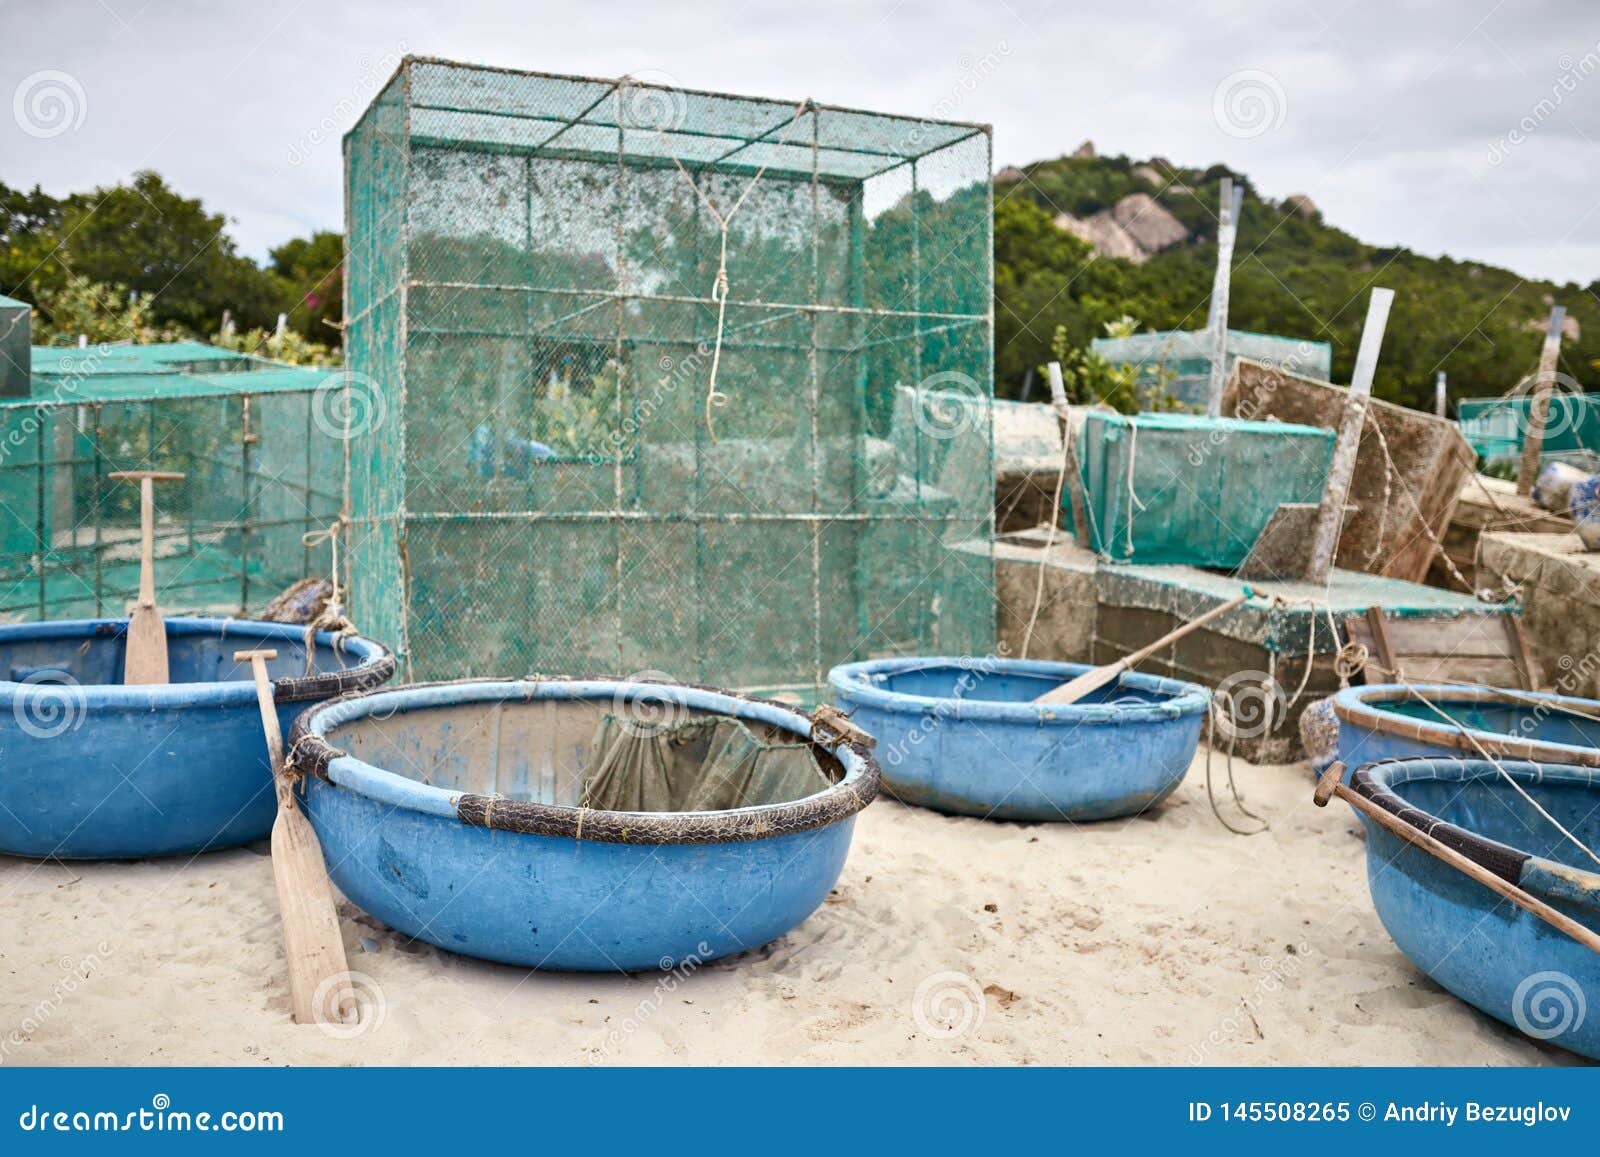 Lobster Netting Cages on Sand Beach in Vietnam Stock Image - Image